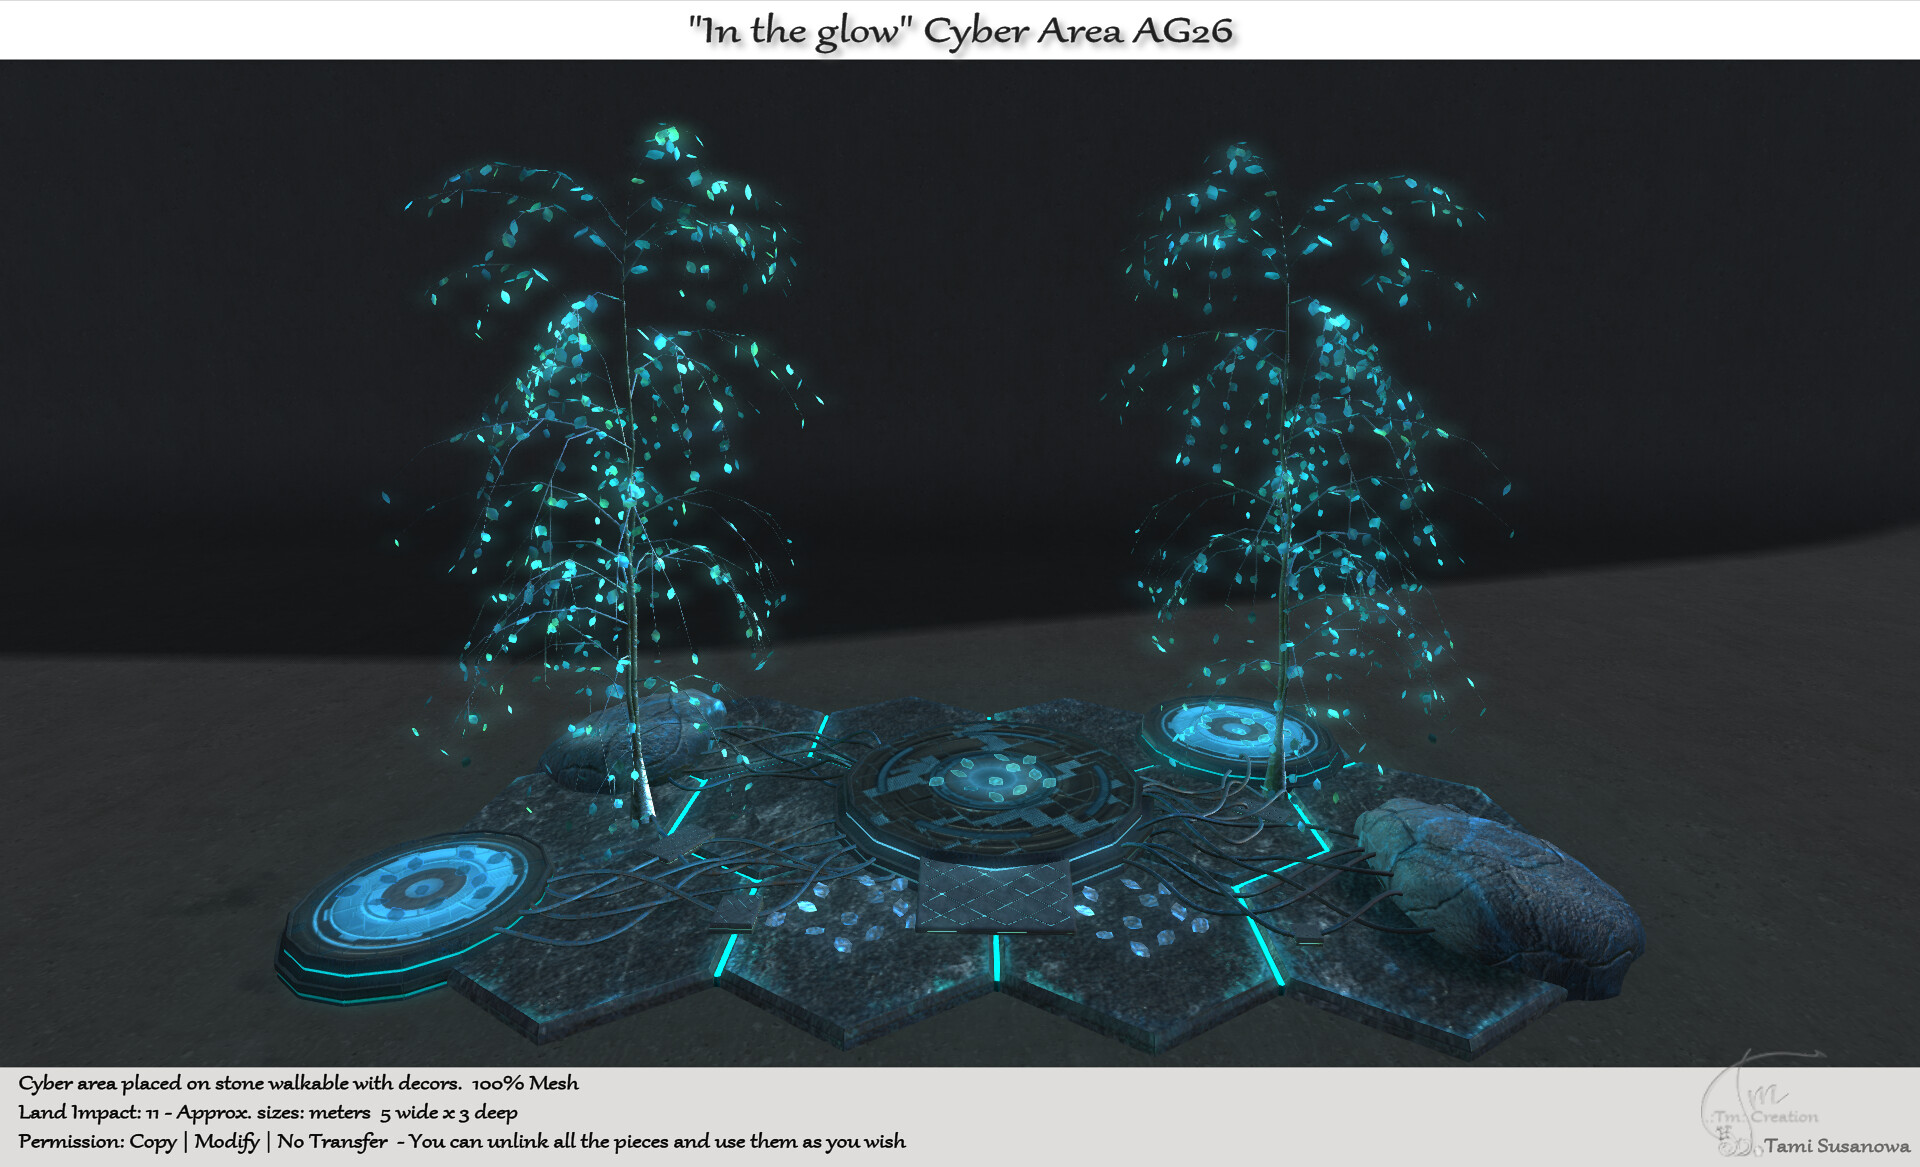 Tm Creation – “In the Glow” Cyber Area